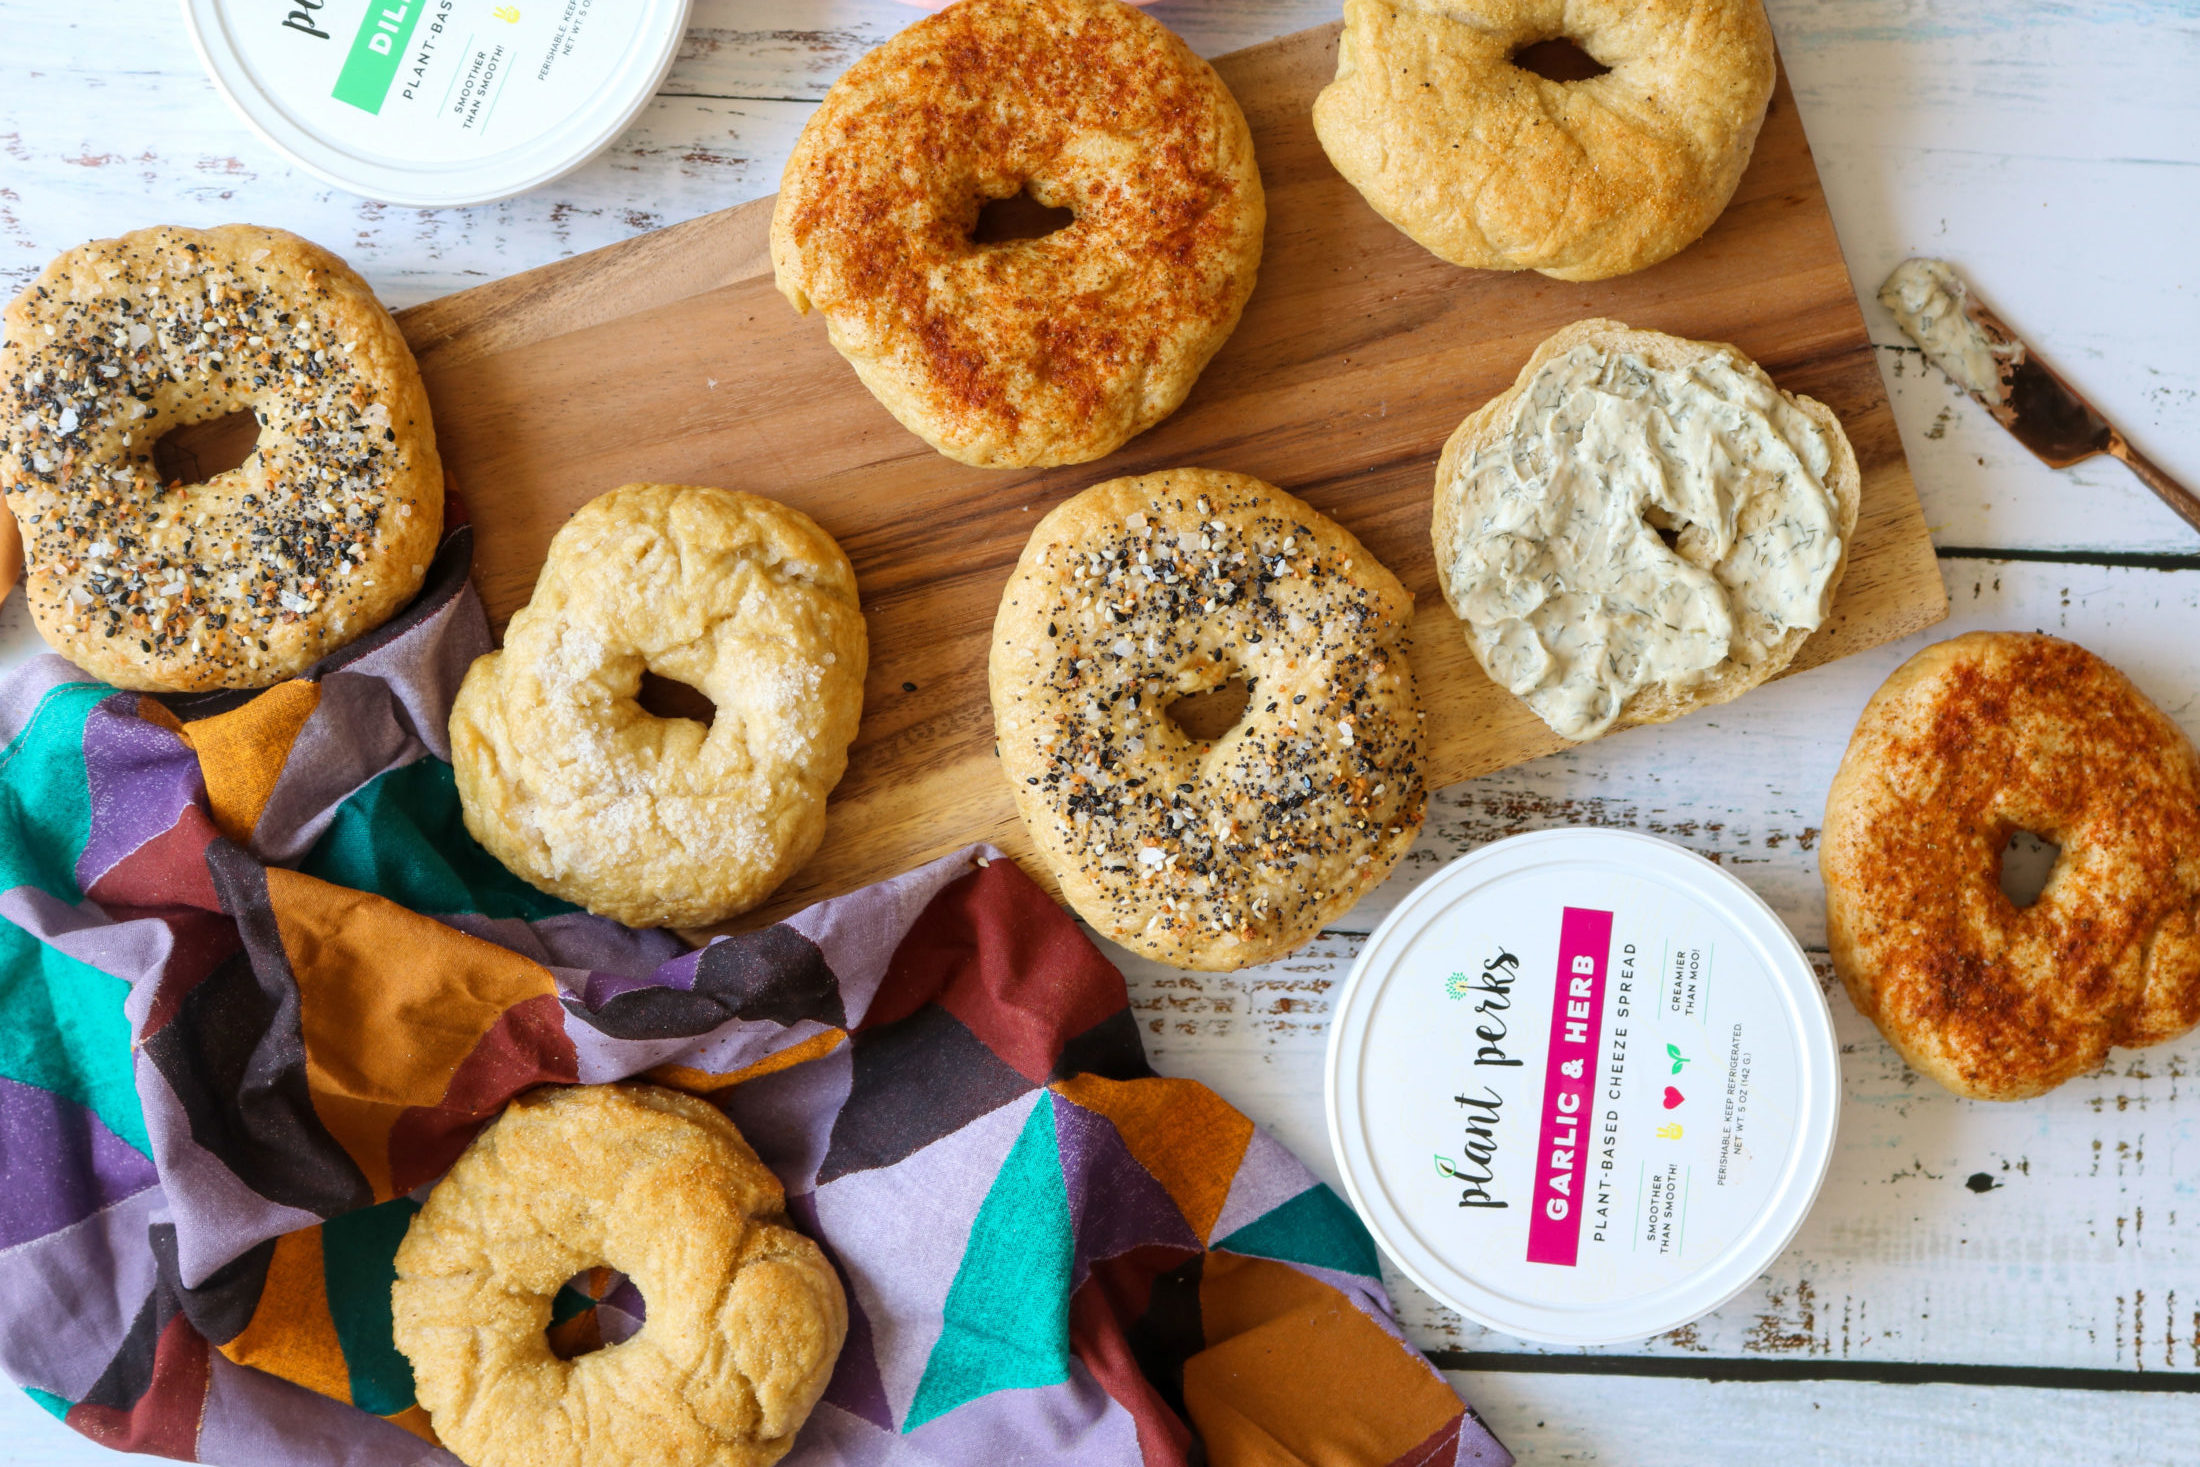 Alert: Gluten Alert in 'Safe' Mini Bagels – What Shoppers Need to Know Now